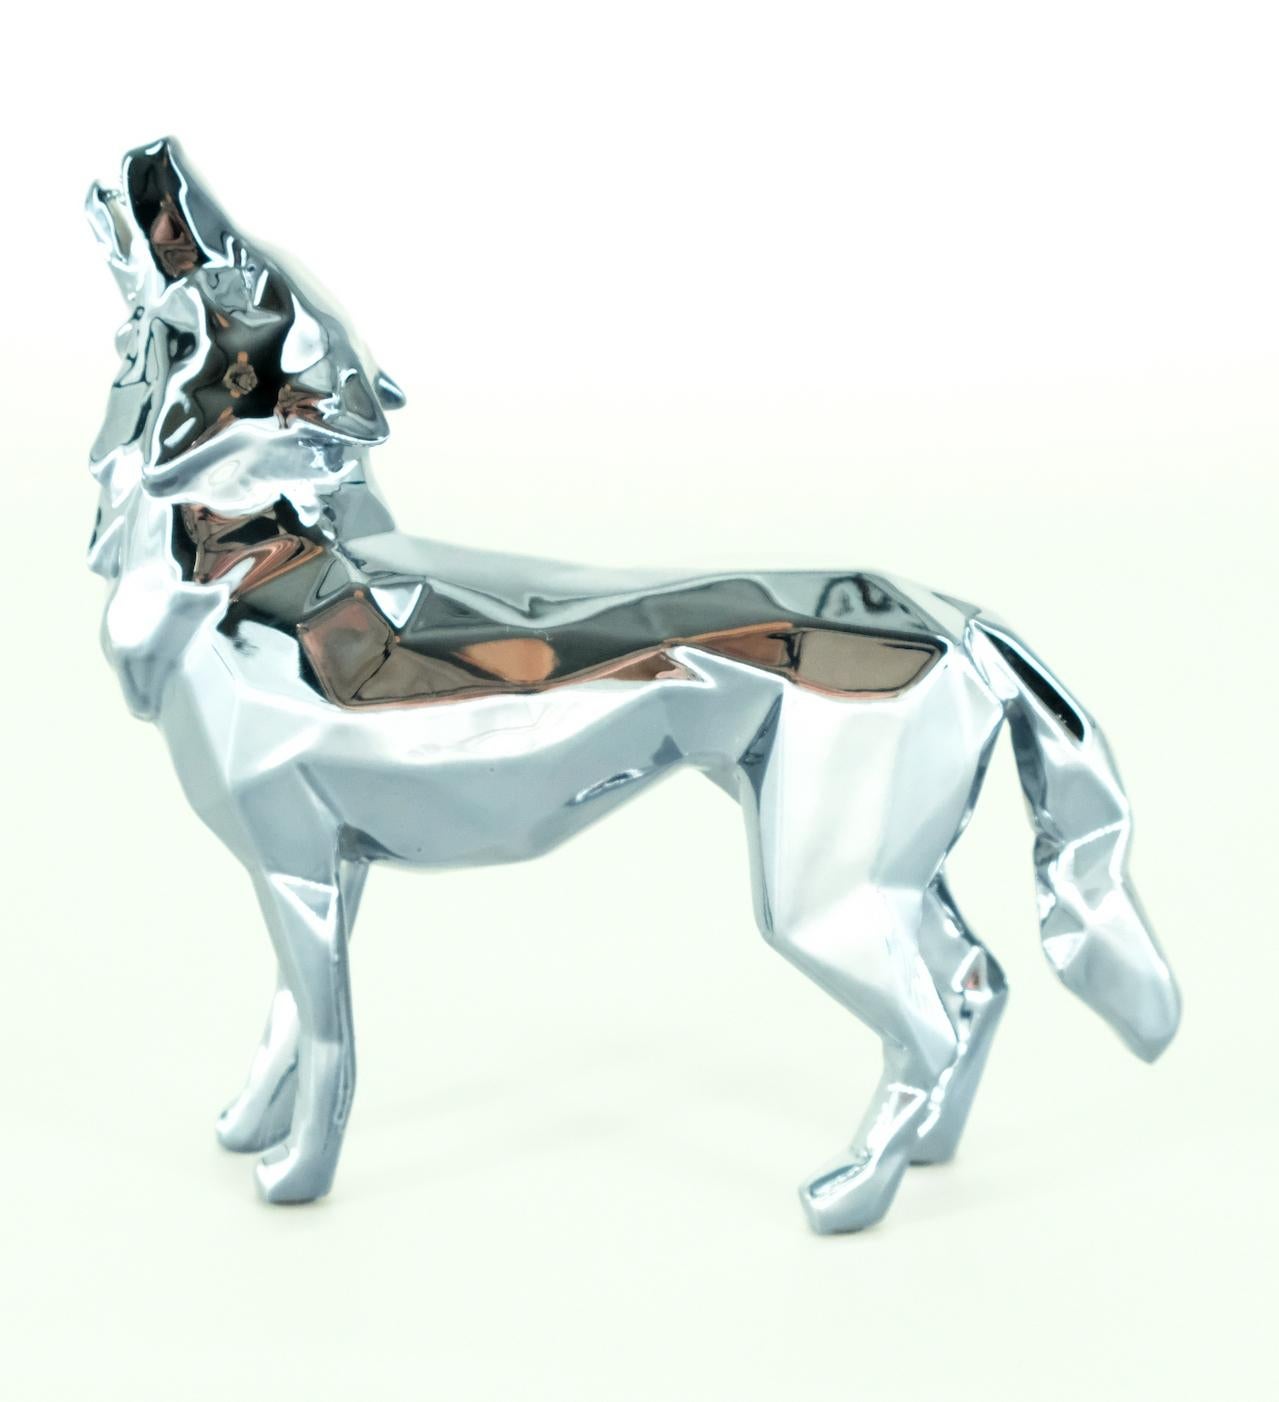 Richard ORLINSKI
Wolf Spirit (Pearl Grey Edition)

Sculpture in resin
Metallic grey
About 13 x 14 x 4 cm (c. 5.1 x 5.5 x 1.5 in)
Presented in original box with certificate

Excellent condition